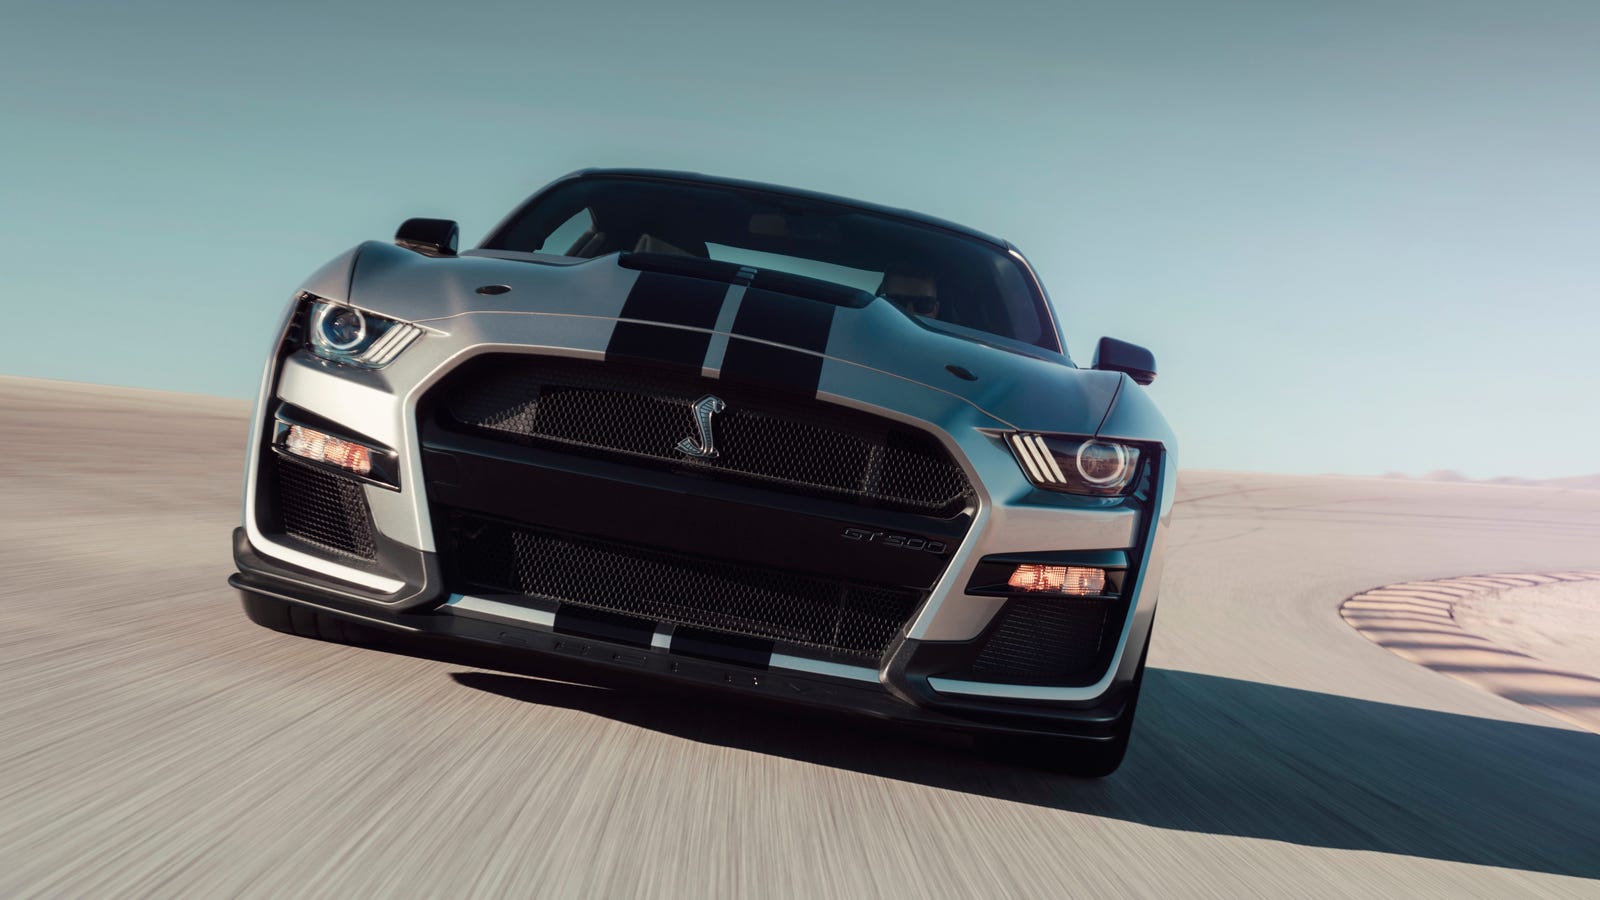 2020 Ford Mustang Shelby Gt500 Hd Wallpaper